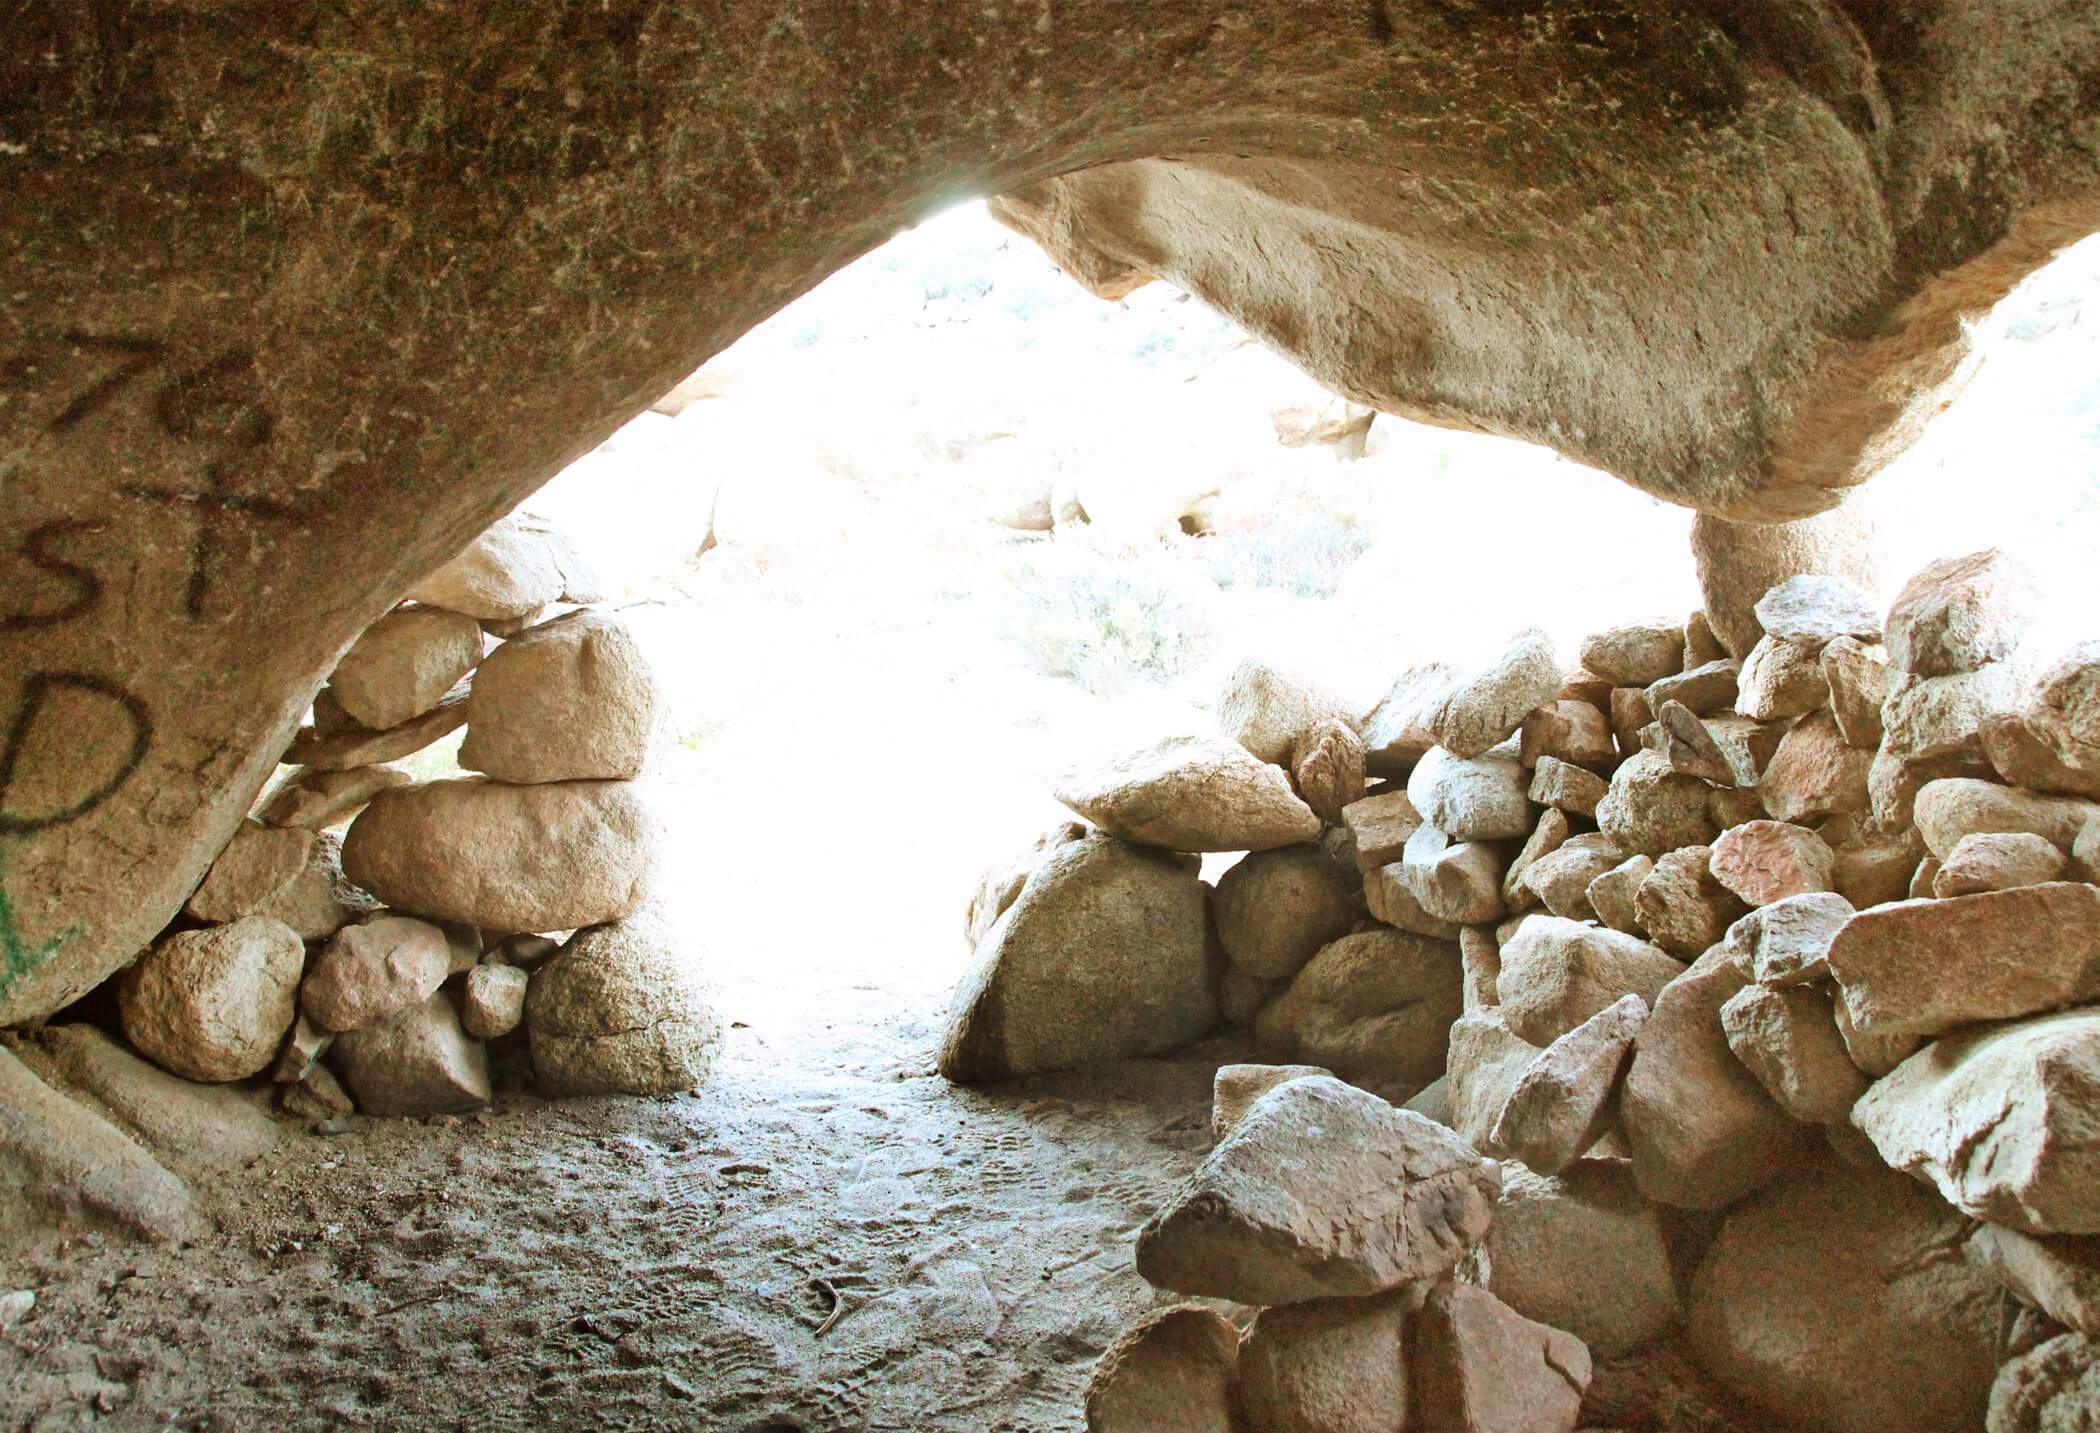 Hike to One of San Diego's Smugglers Caves & Ancient Wind Caves deep in the desert